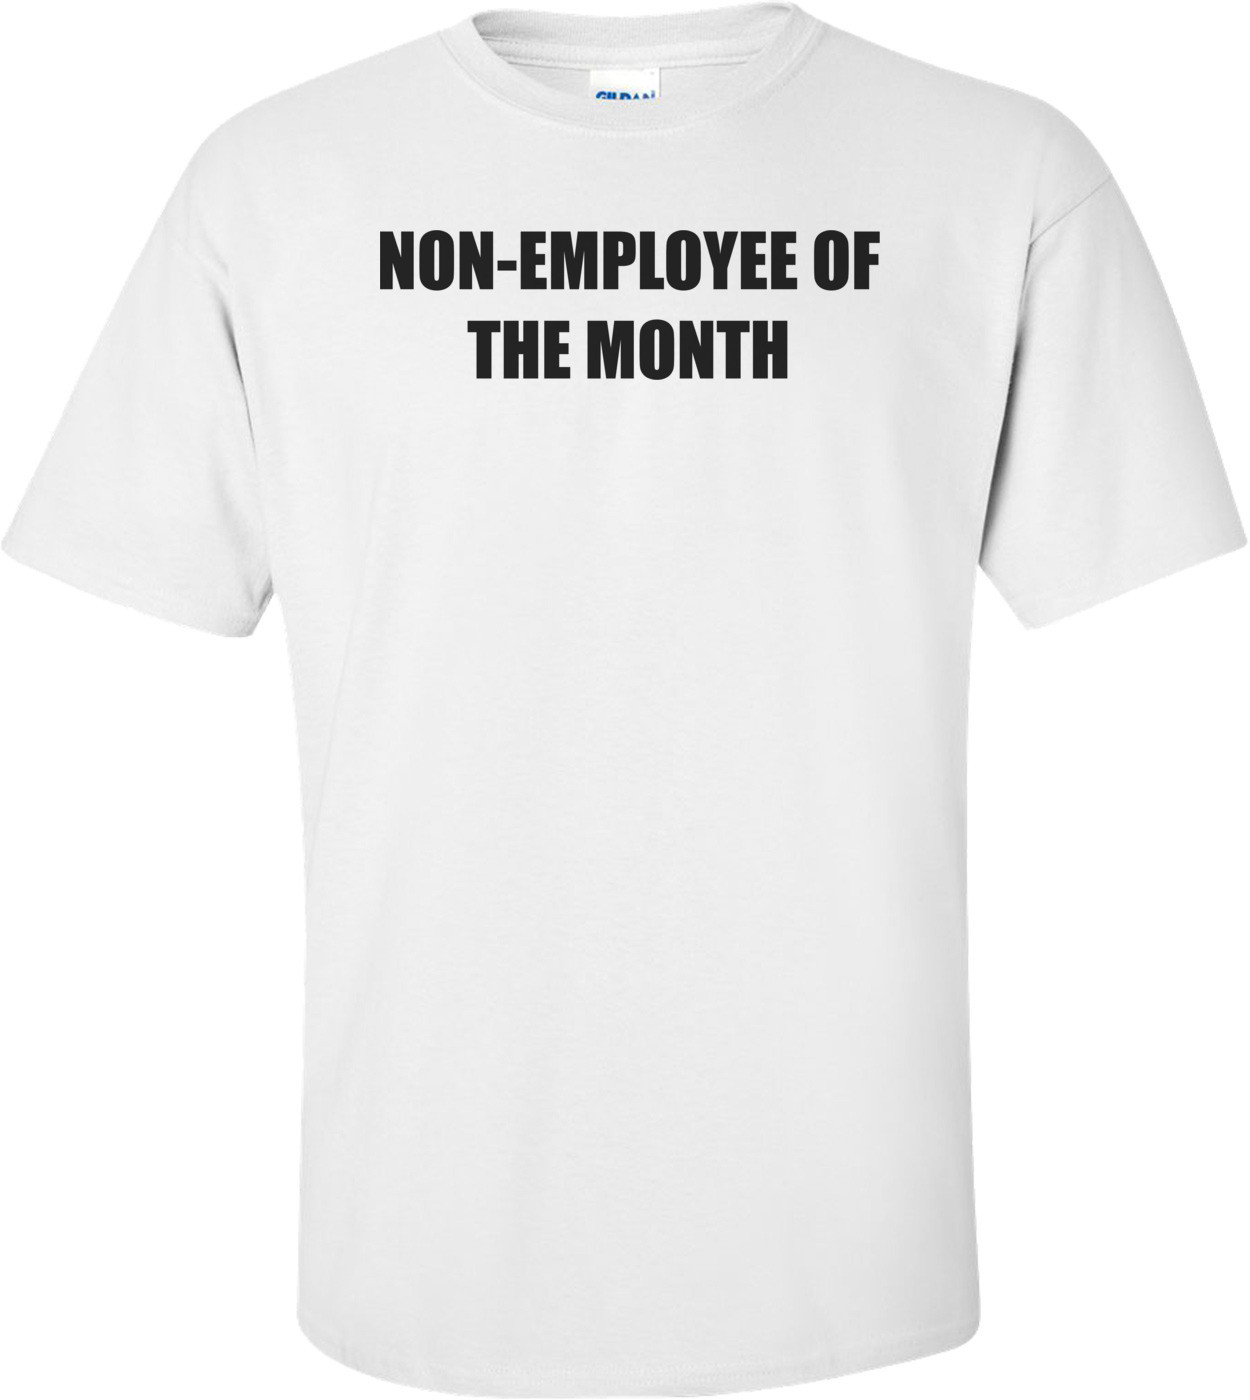 NON-EMPLOYEE OF THE MONTH